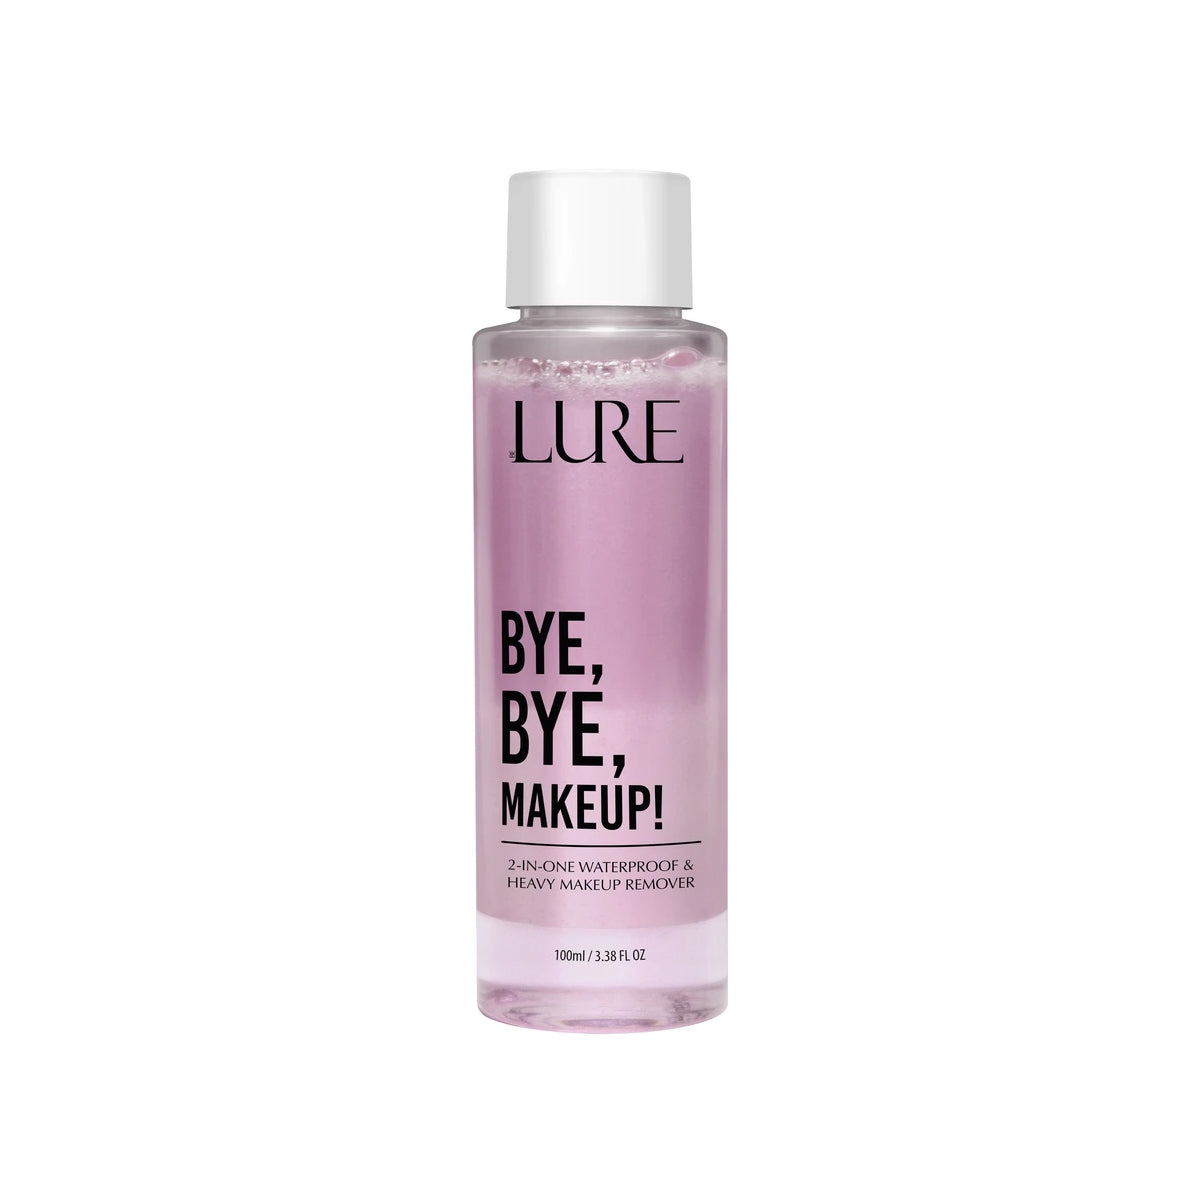 BYE BYE MAKEUP REMOVER - LURE